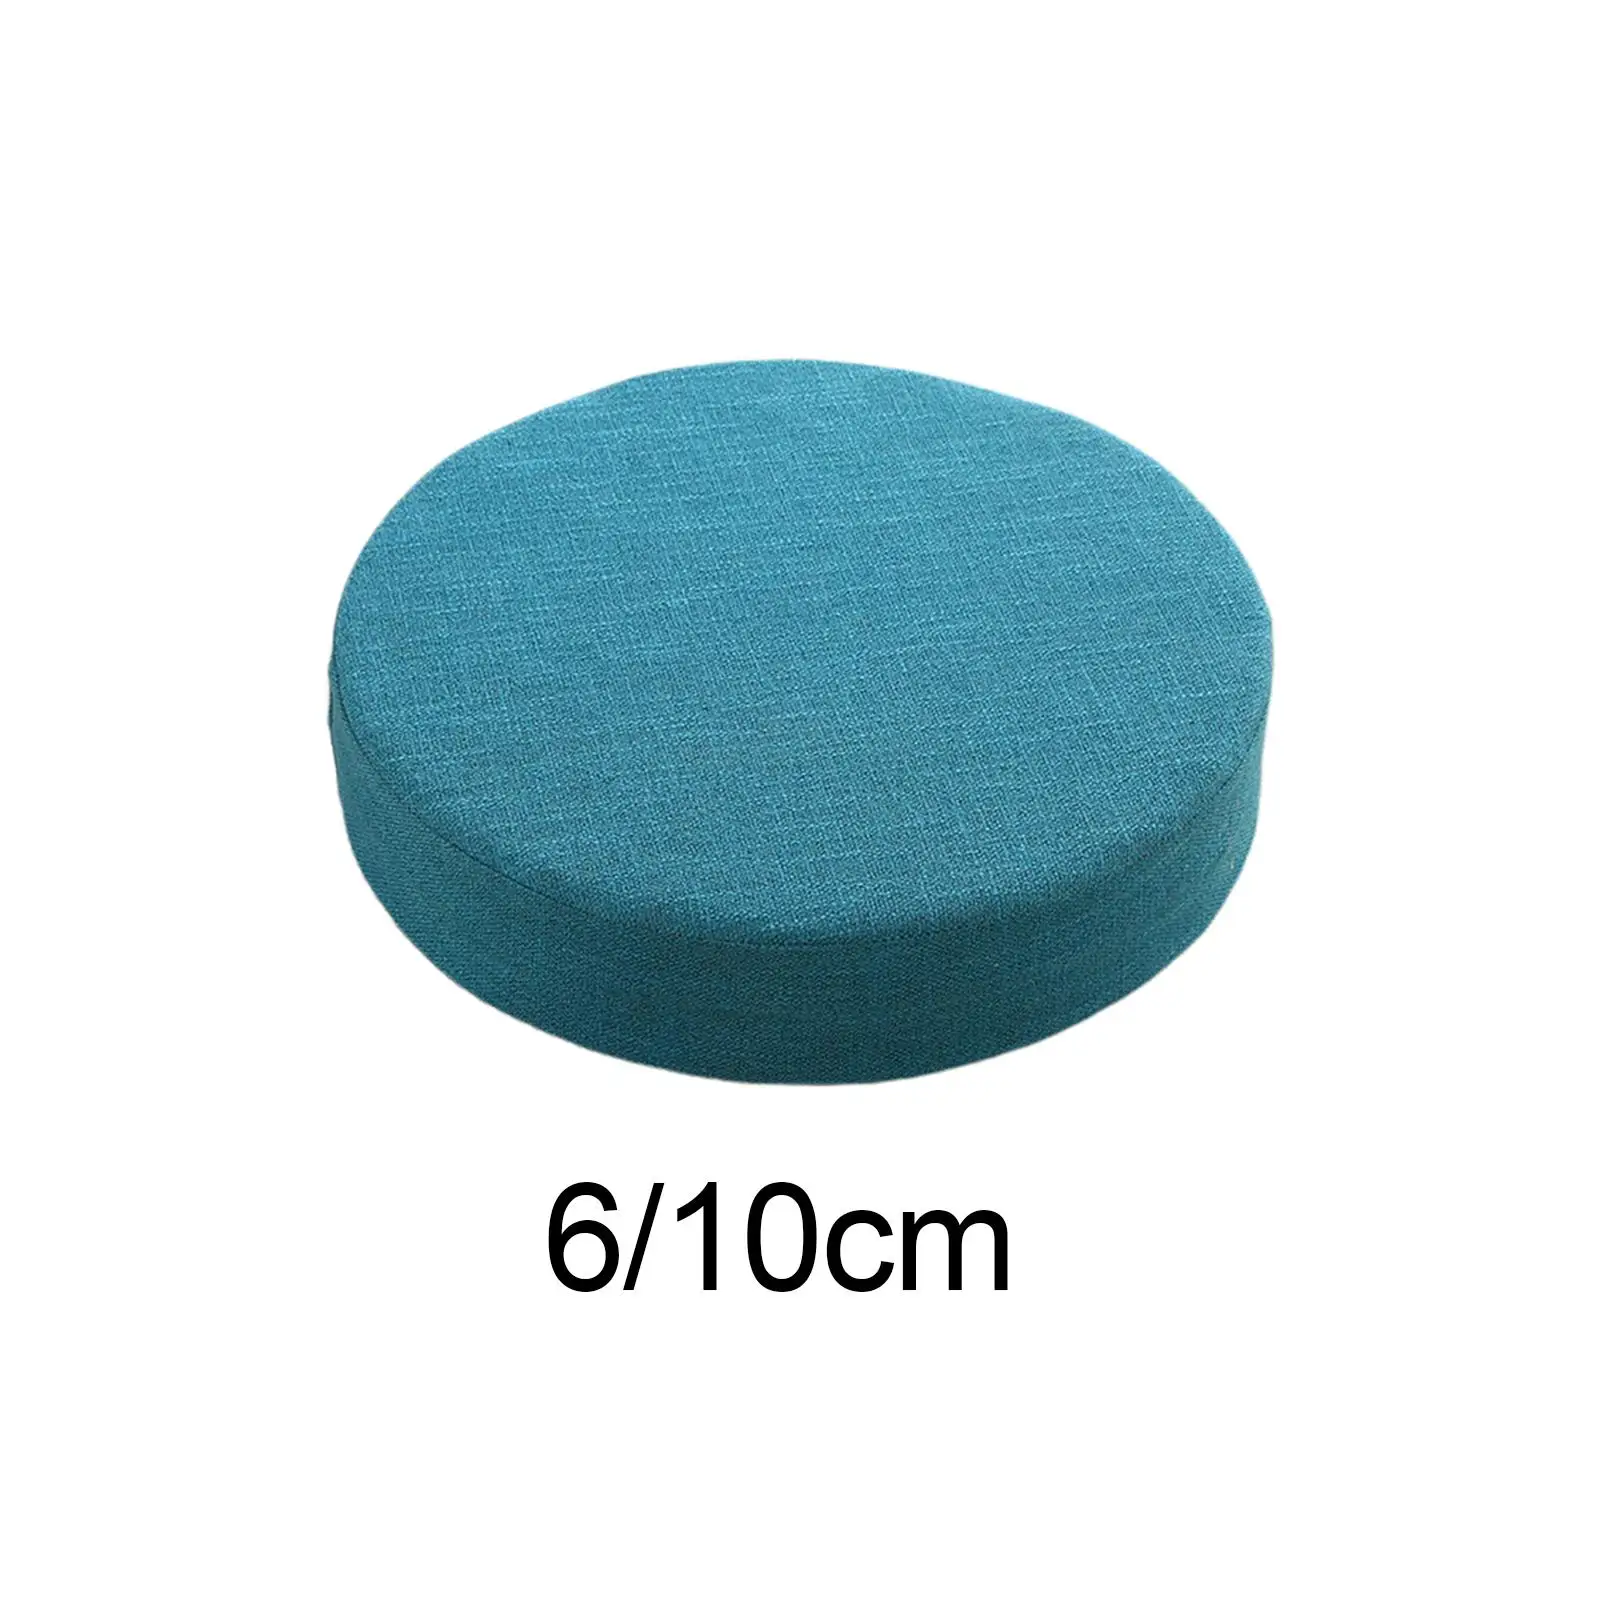 Outdoor Floor Cushions Meditation Floor Pillows Seating for Adults Foam Round Pouffe Seat Natural Chair Pad for Room Outdoor